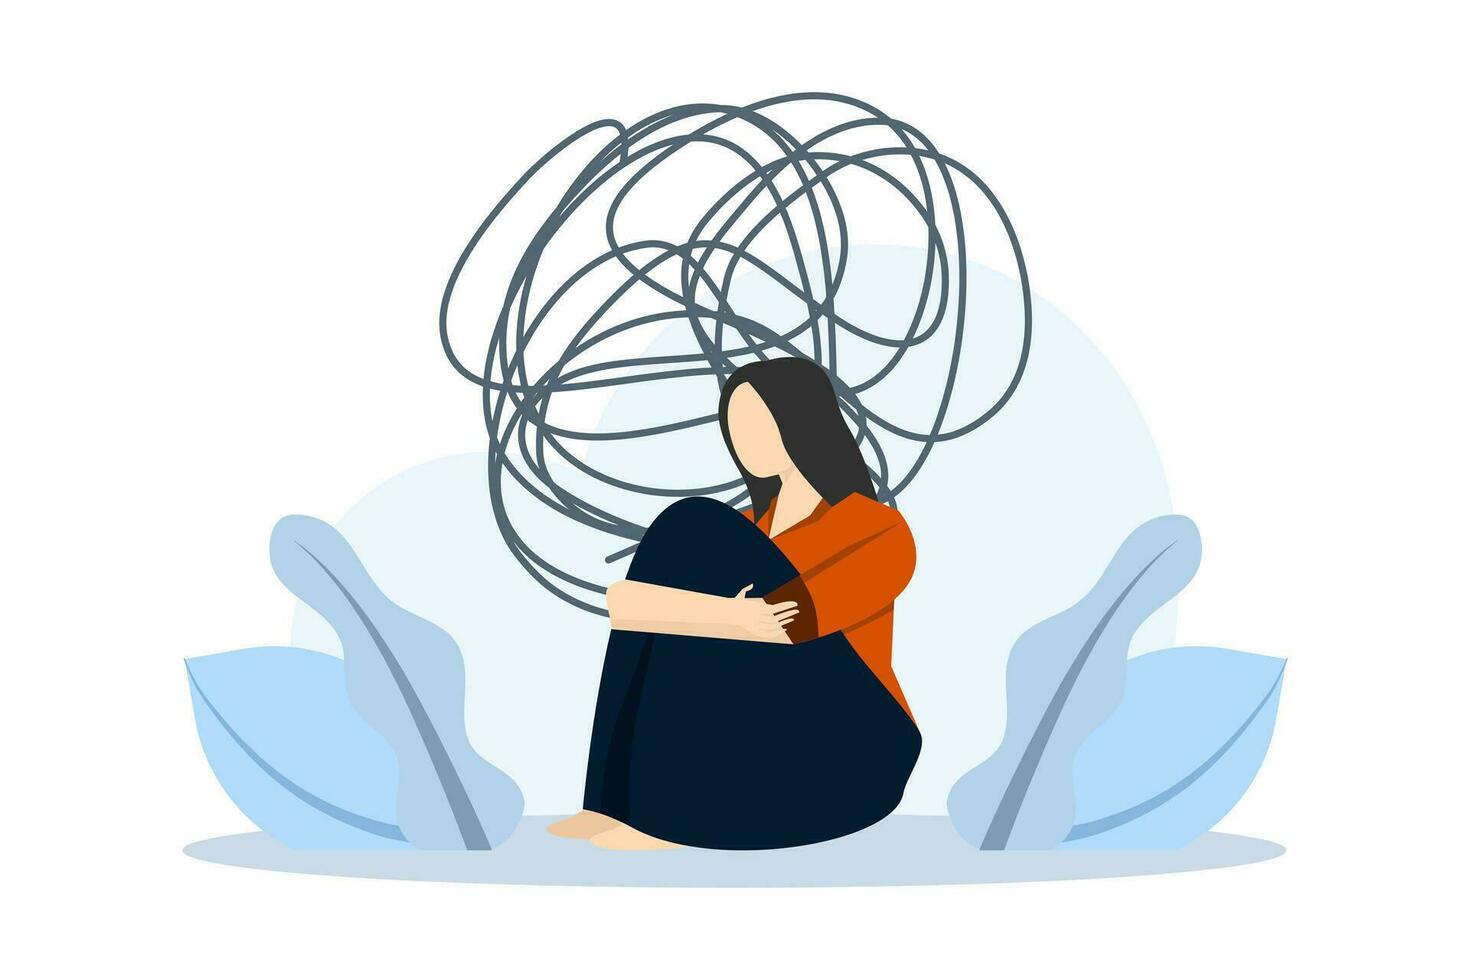 Mental depression concept. depressed person sitting on the floor. Mental health and psychotherapy concept. Anxiety, stress, emotional exhaustion and other psychological problems. vector illustration.